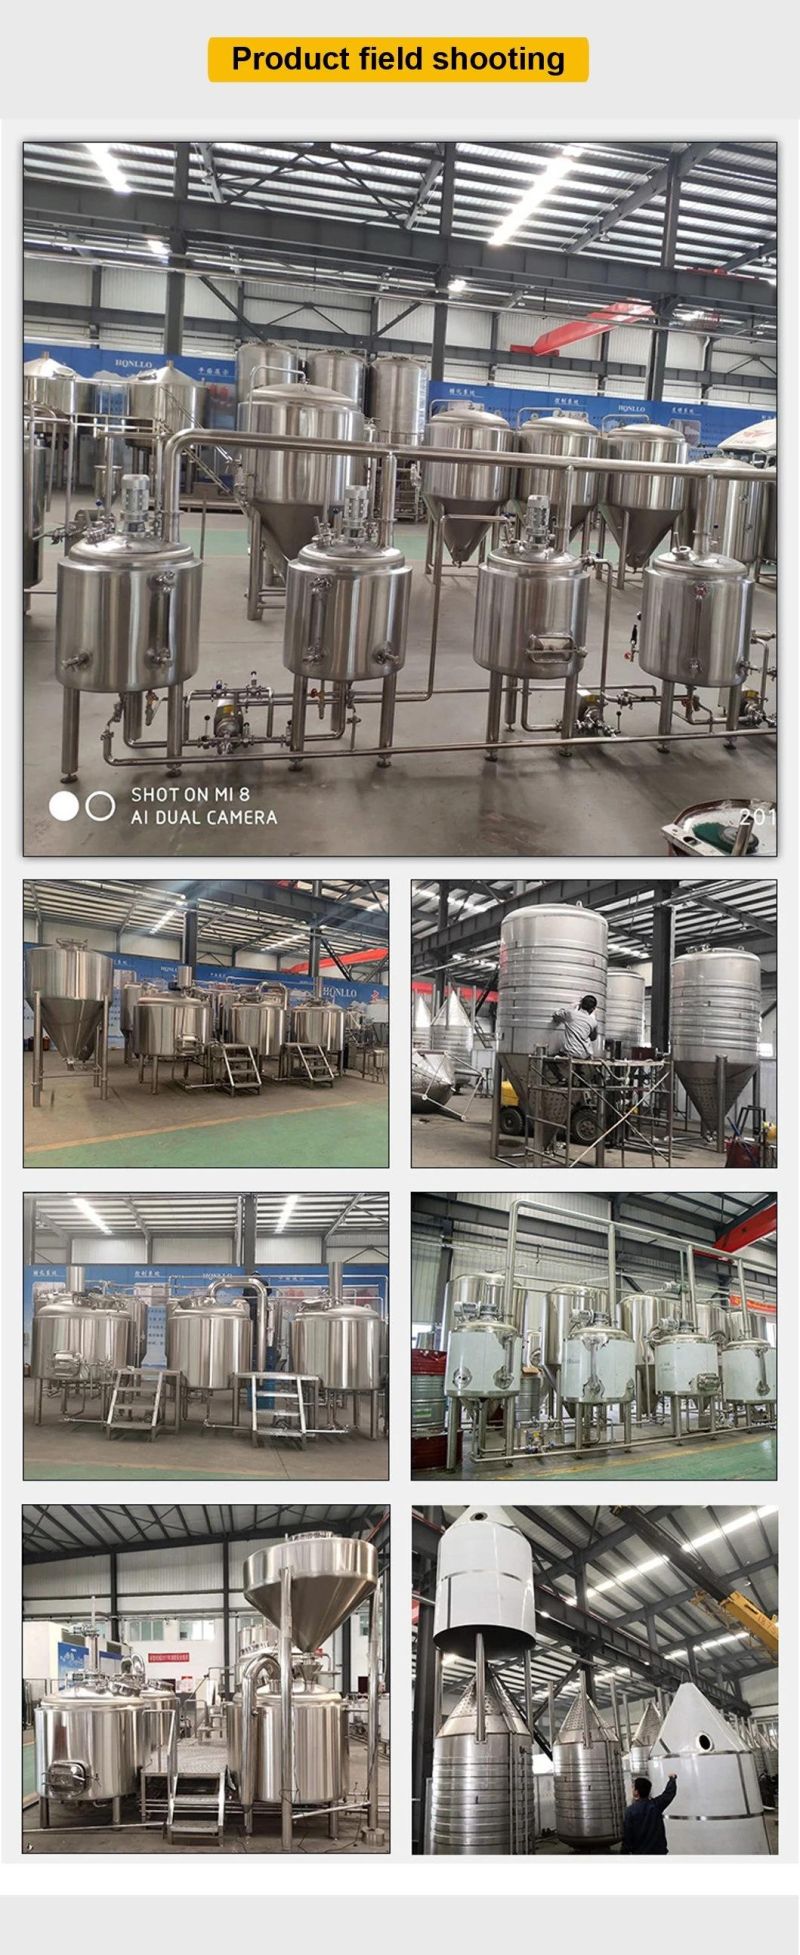 Completely Fully Set of Beer Making Equipment with Touch Screen Control